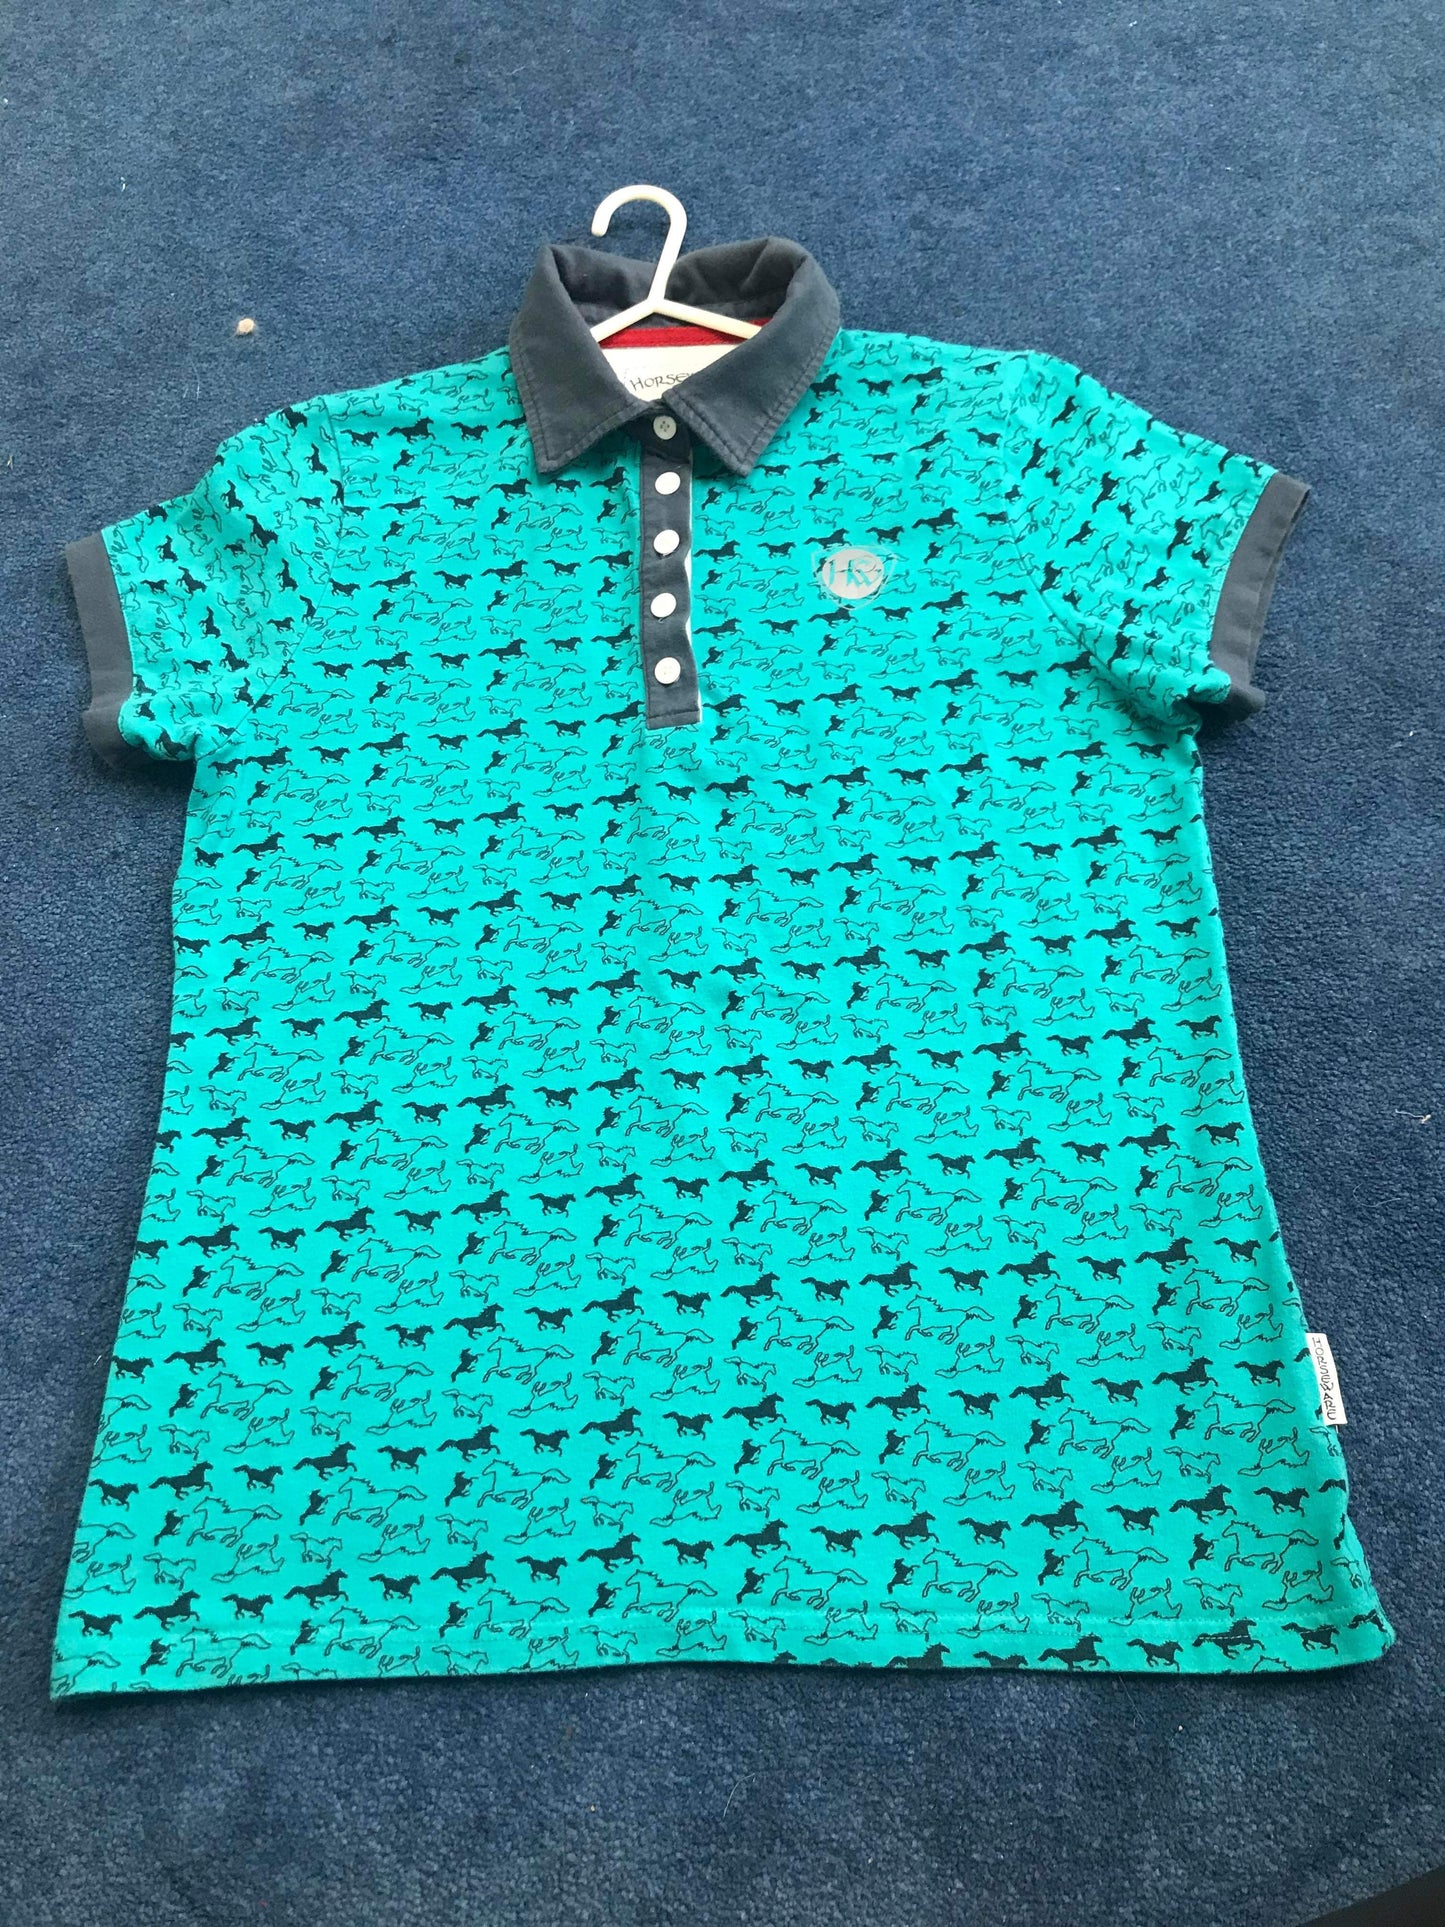 Horsewear green horse print size 14 FREE POSTAGE❤️